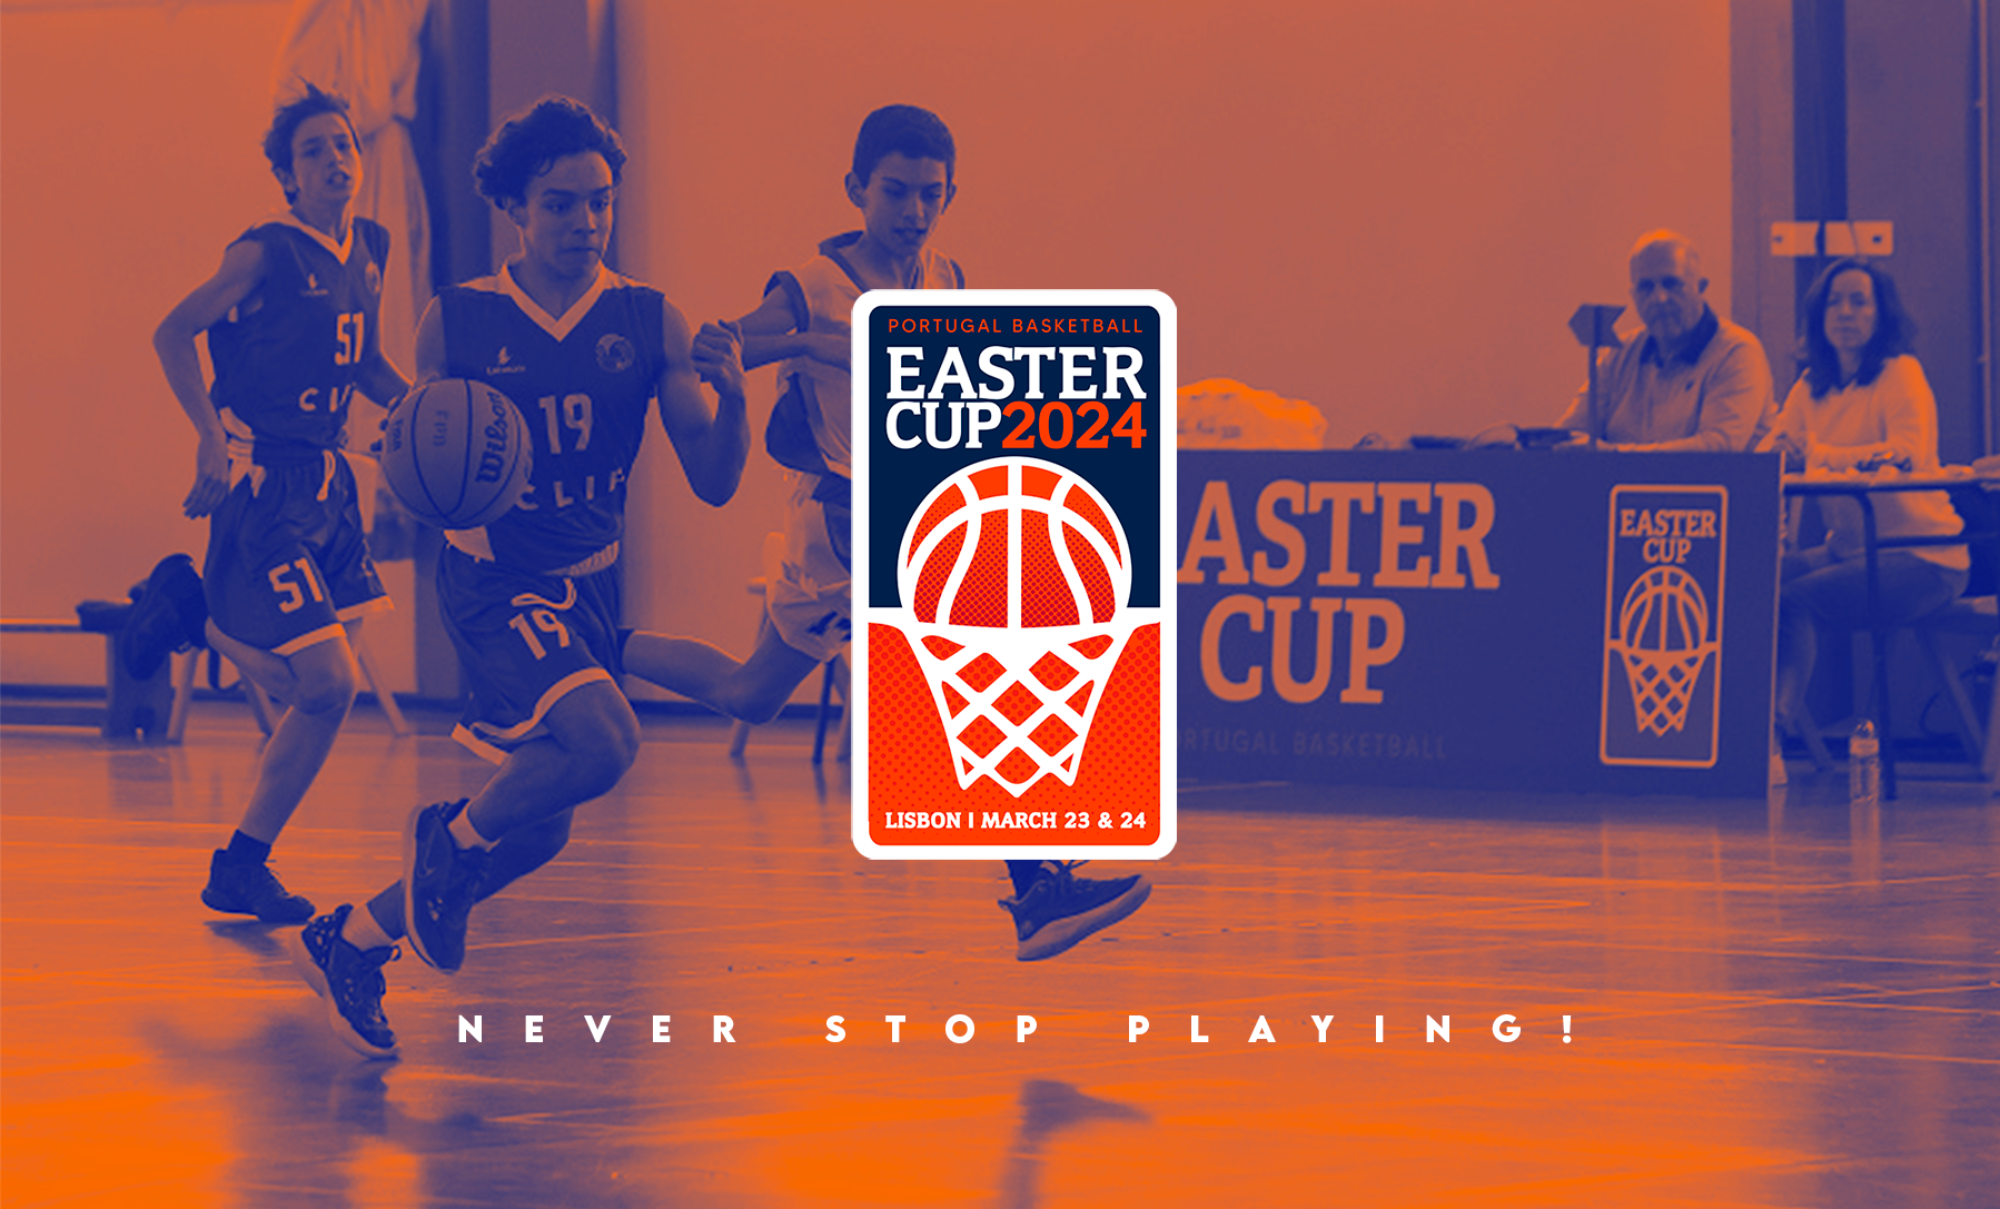 Portugal Basketball Easter Cup 2024